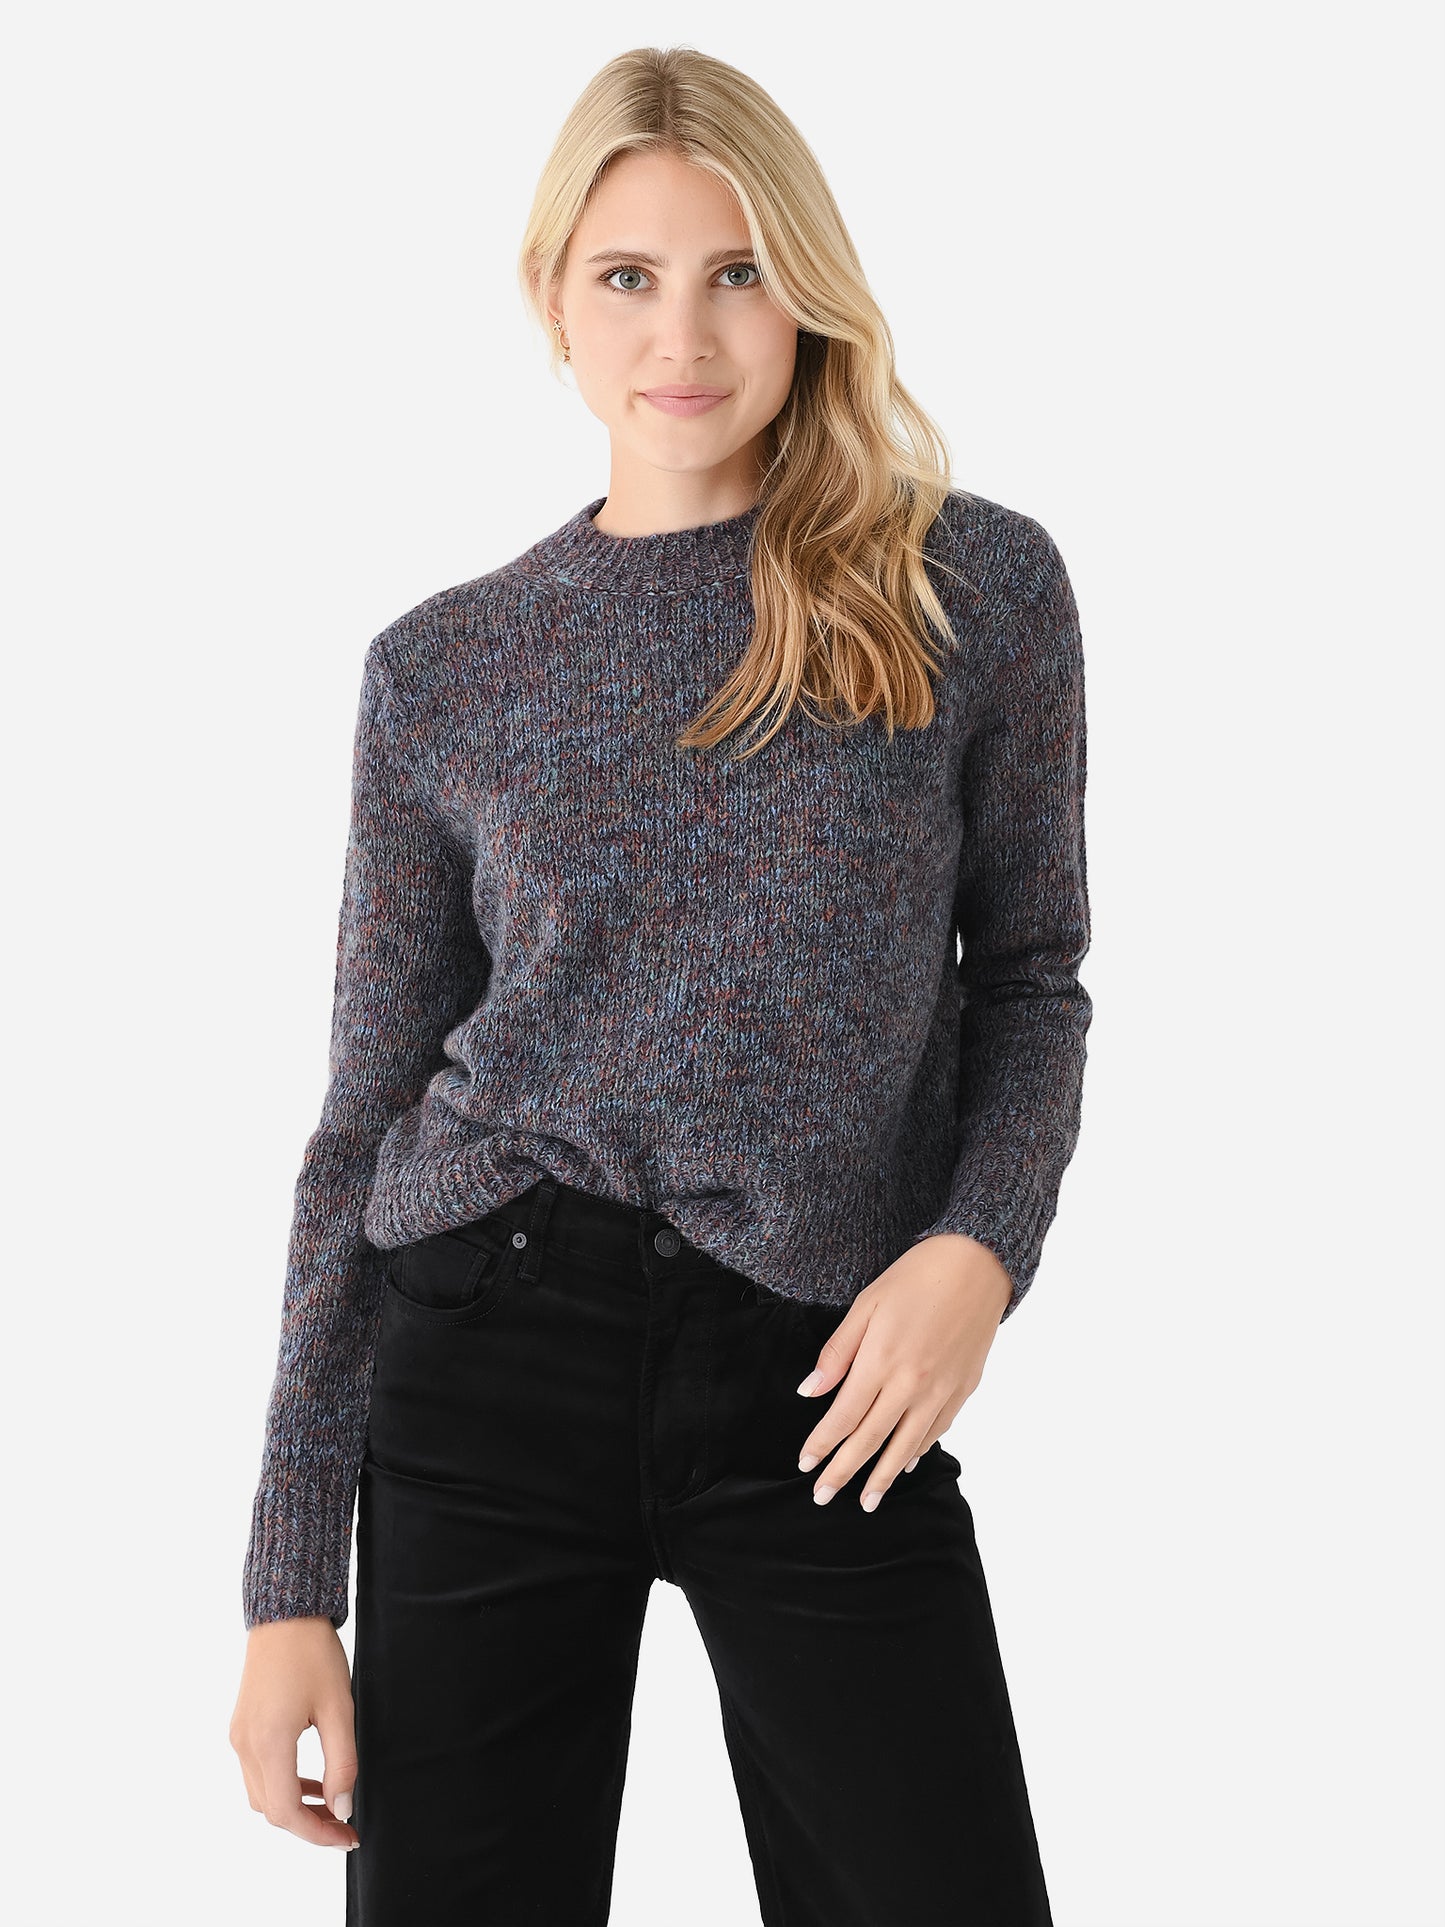 Vince Women's Marled Crew Neck Sweater